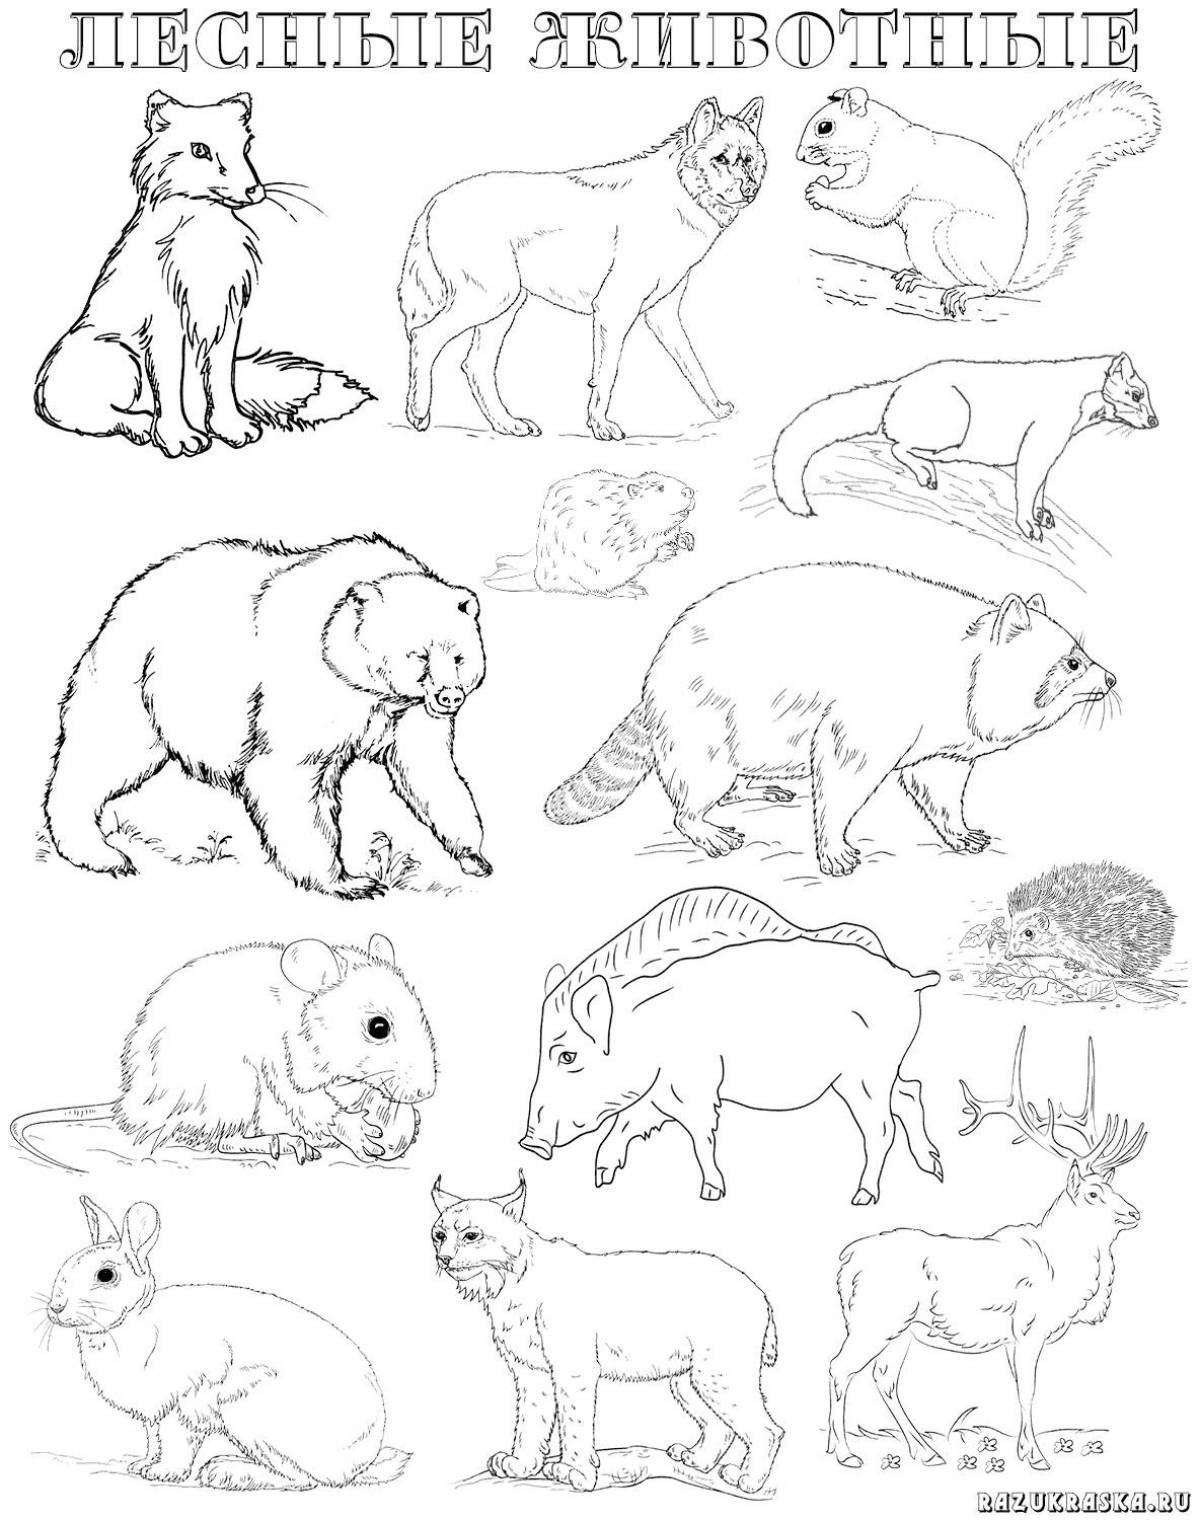 An interesting wild animal coloring page for 6-7 year olds